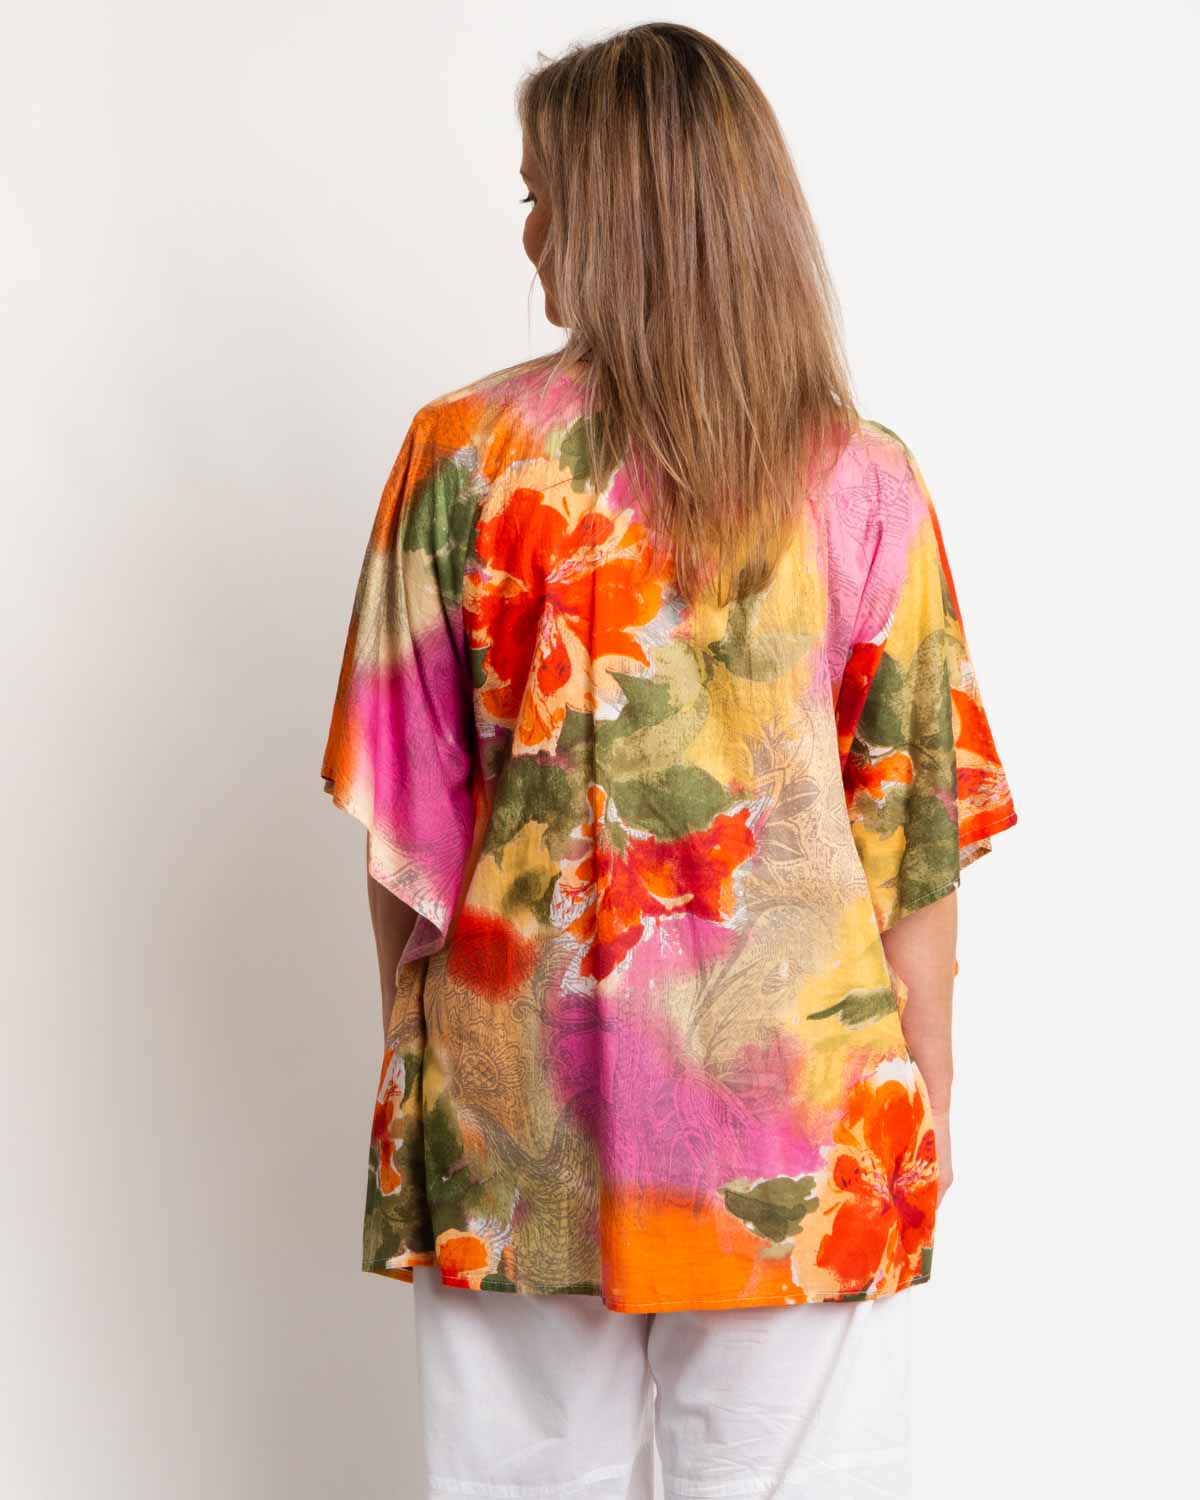 Too Easy Poncho Style V-neck Top in Orange Pink